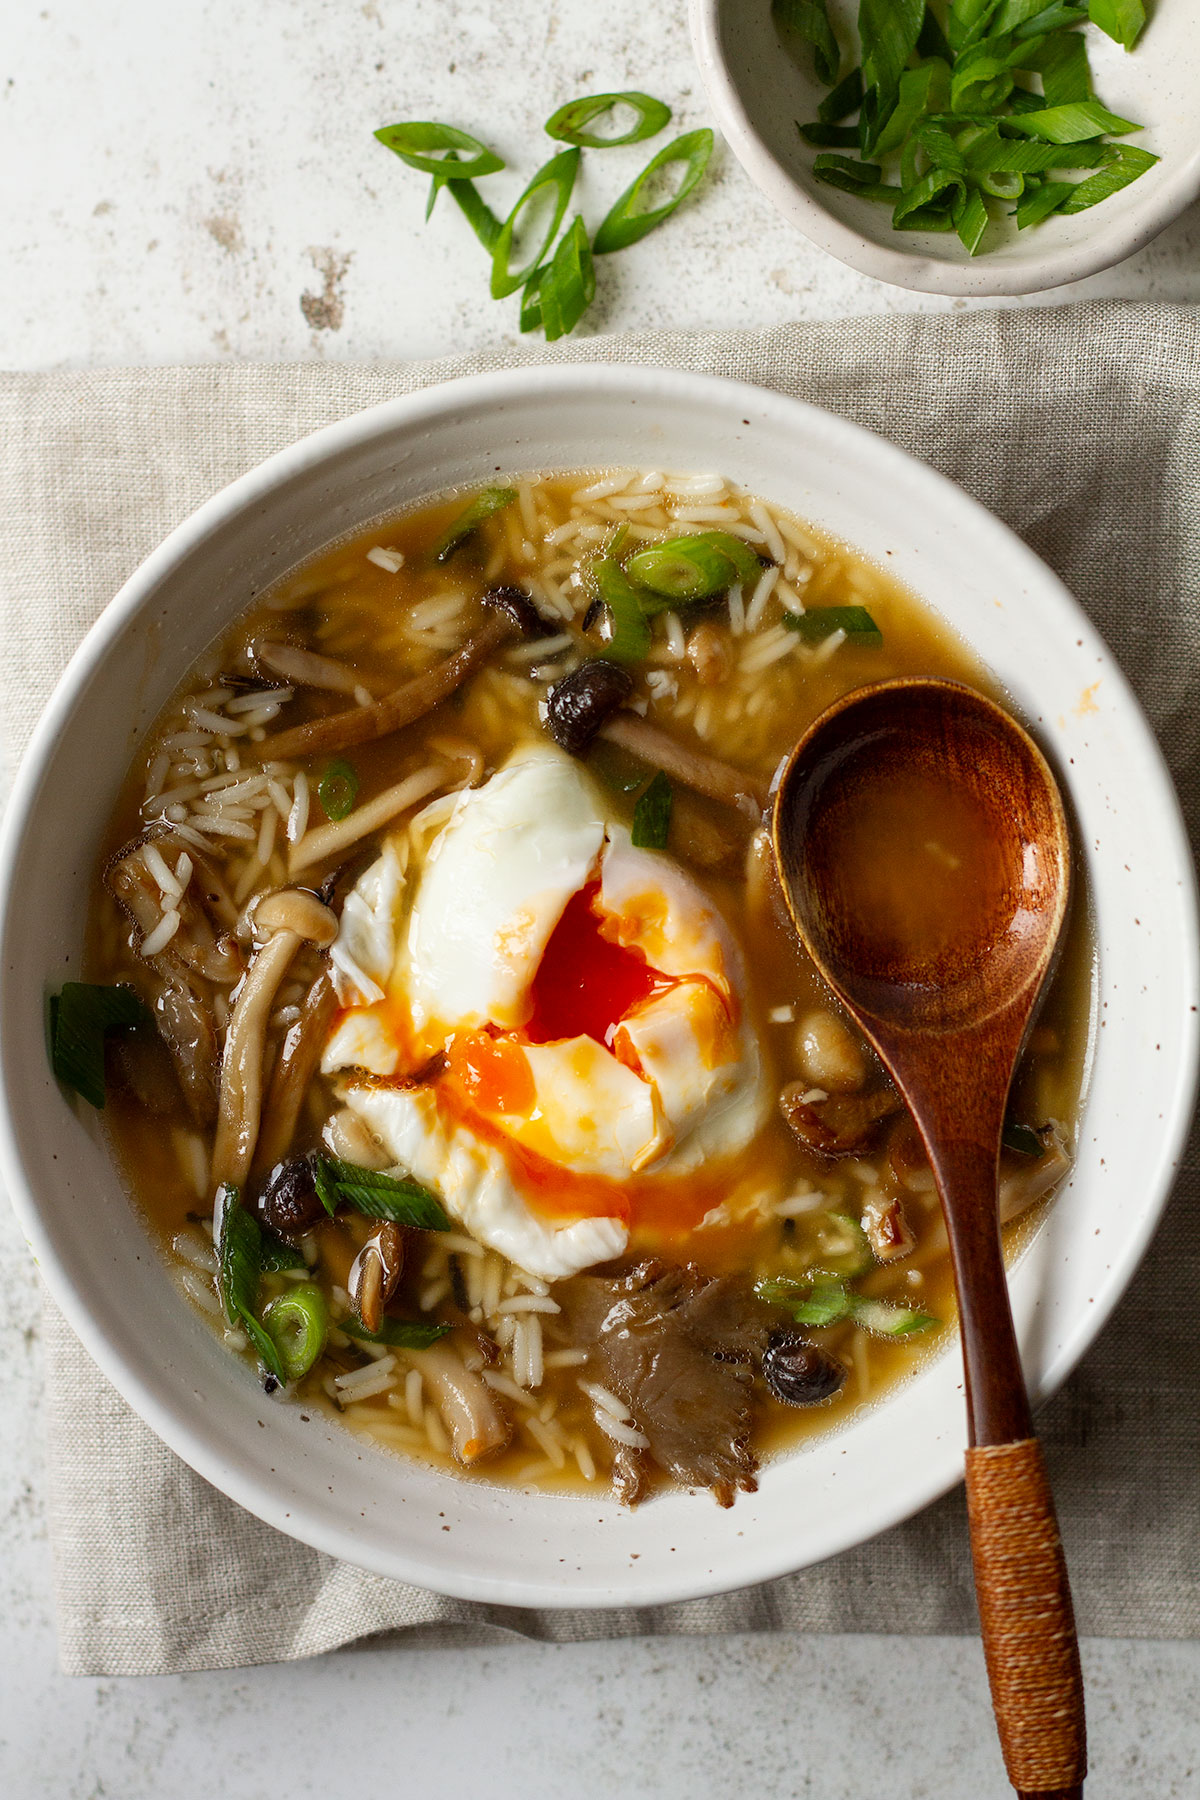 A bowl of miso mushroom soup with rice and a poached egg.